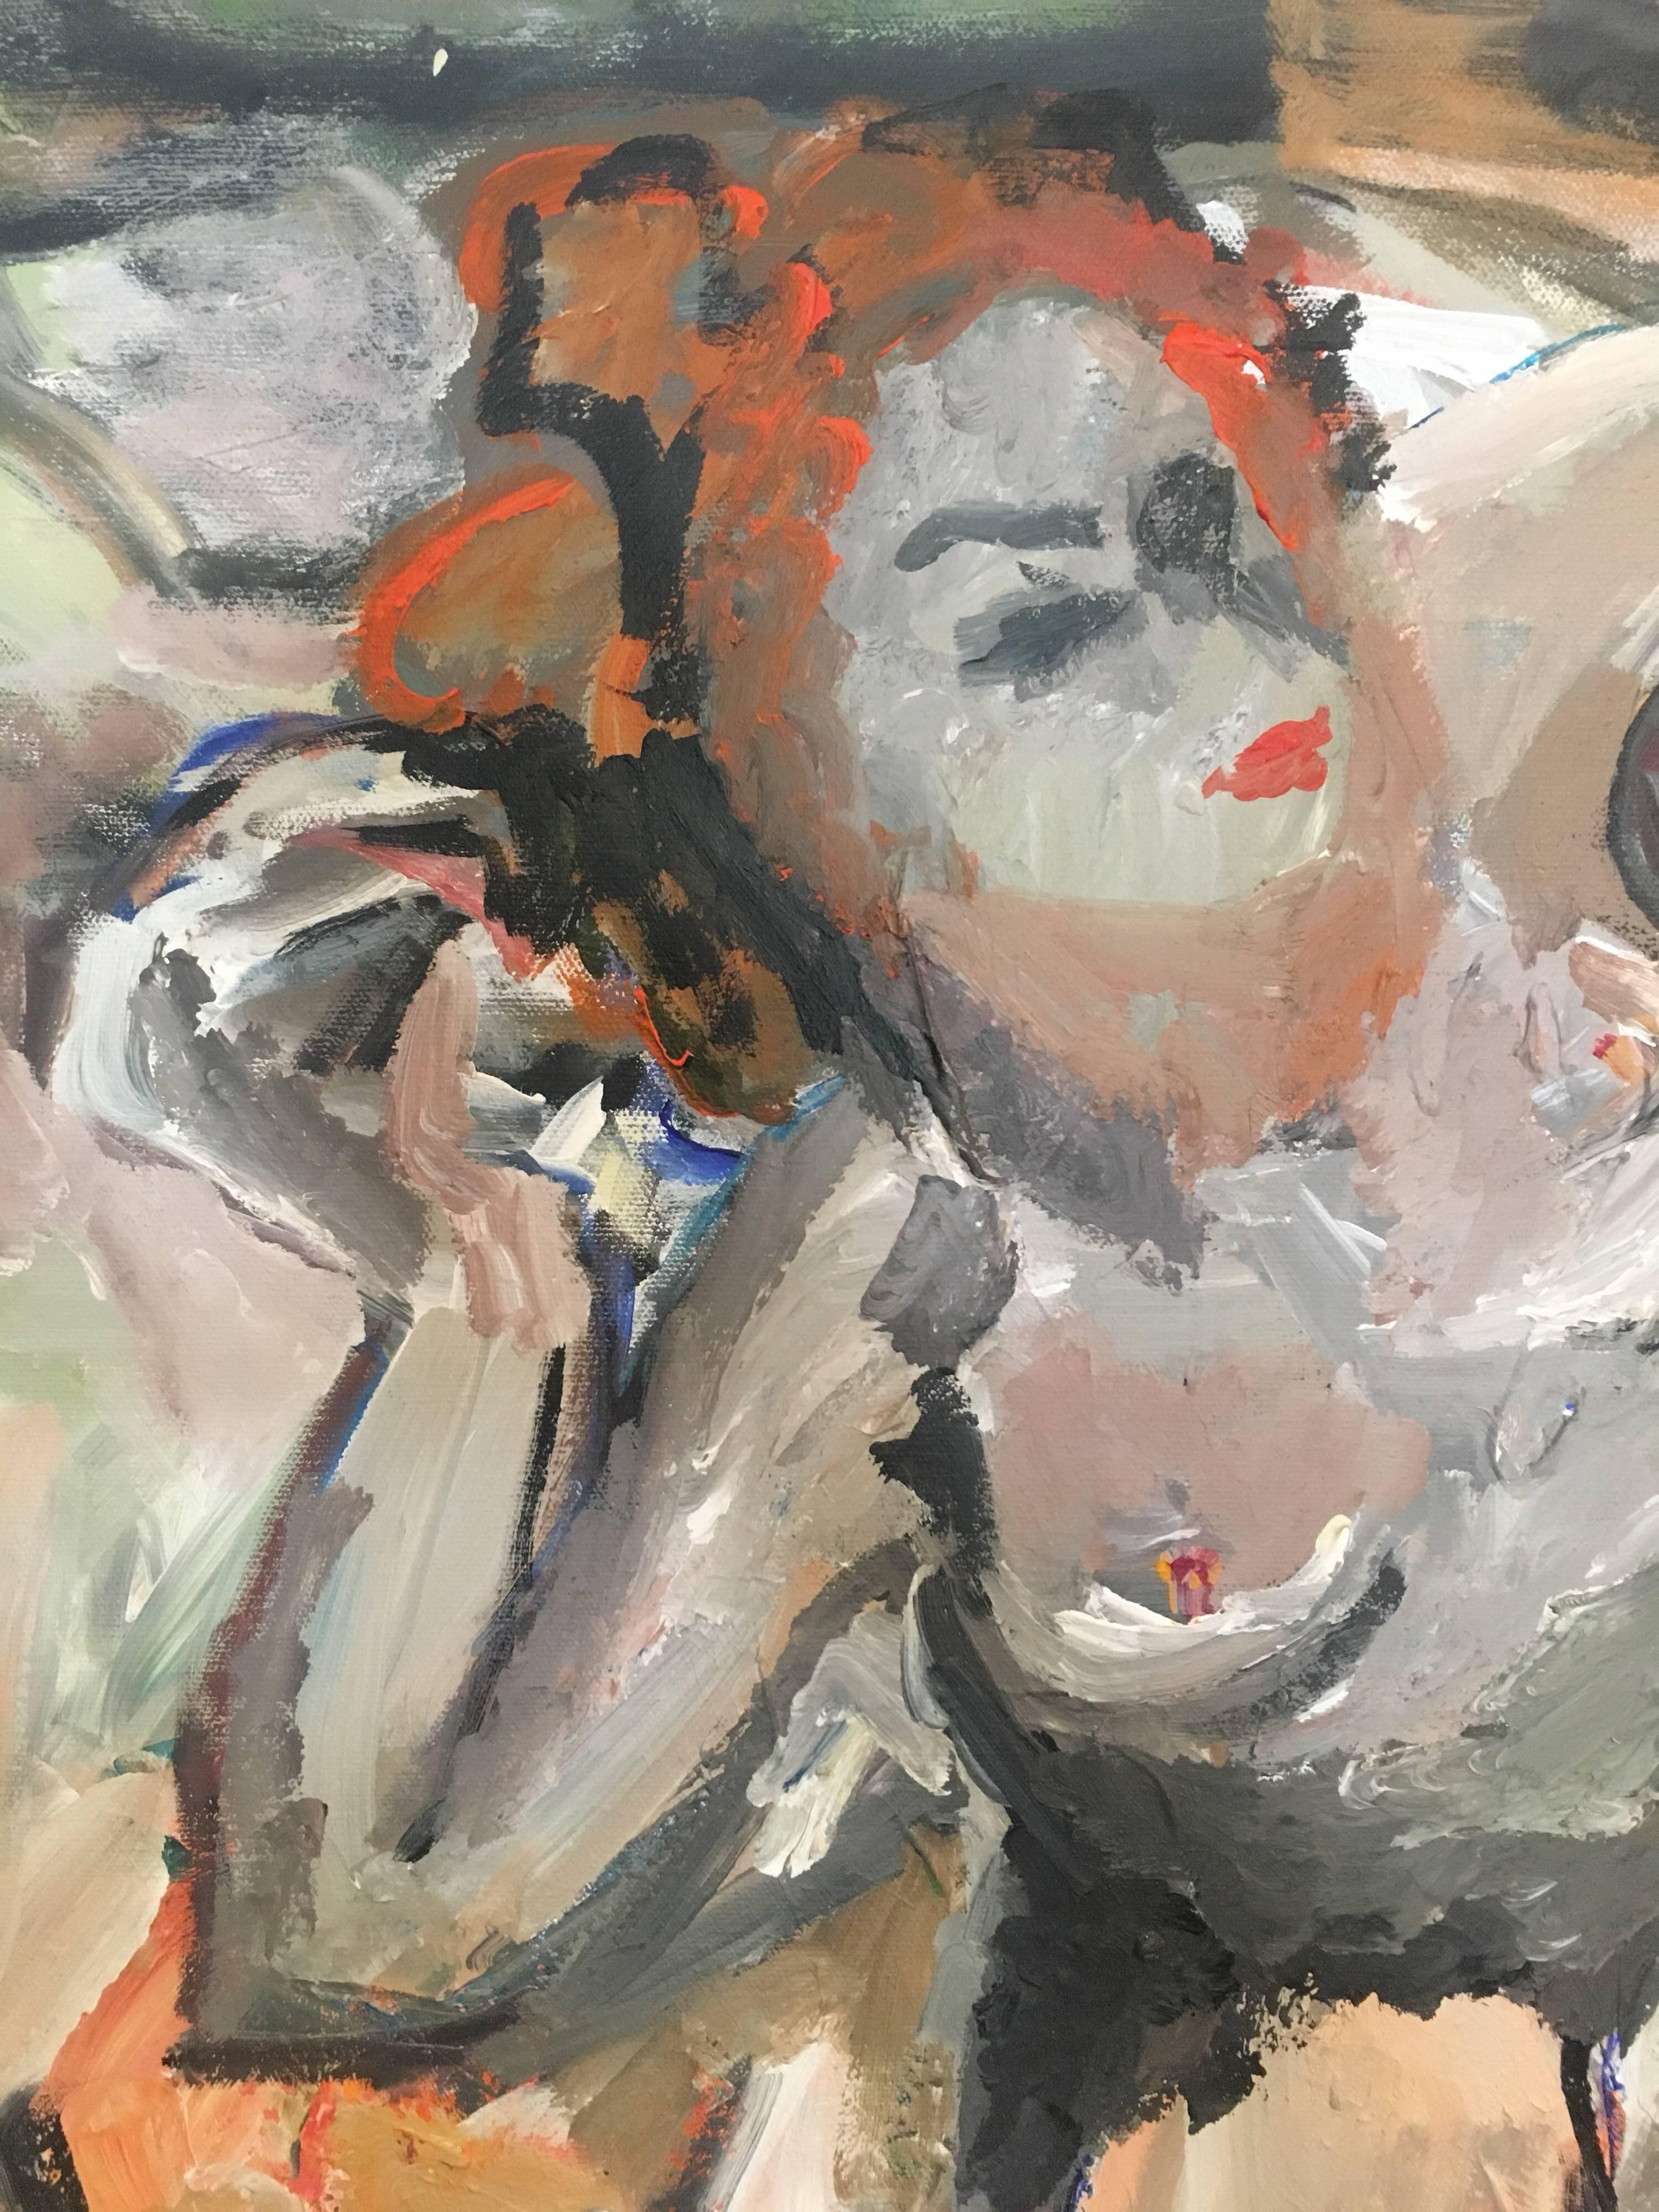 Nude Figure, Impressionist Oil Painting, British Artist
by Pamela Cawley, British 20th century
oil painting on canvas, unframed

canvas: 24 x 20 inches 

Stunning original Impressionist oil painting by the 20th century British artist, Pamela Cawley.